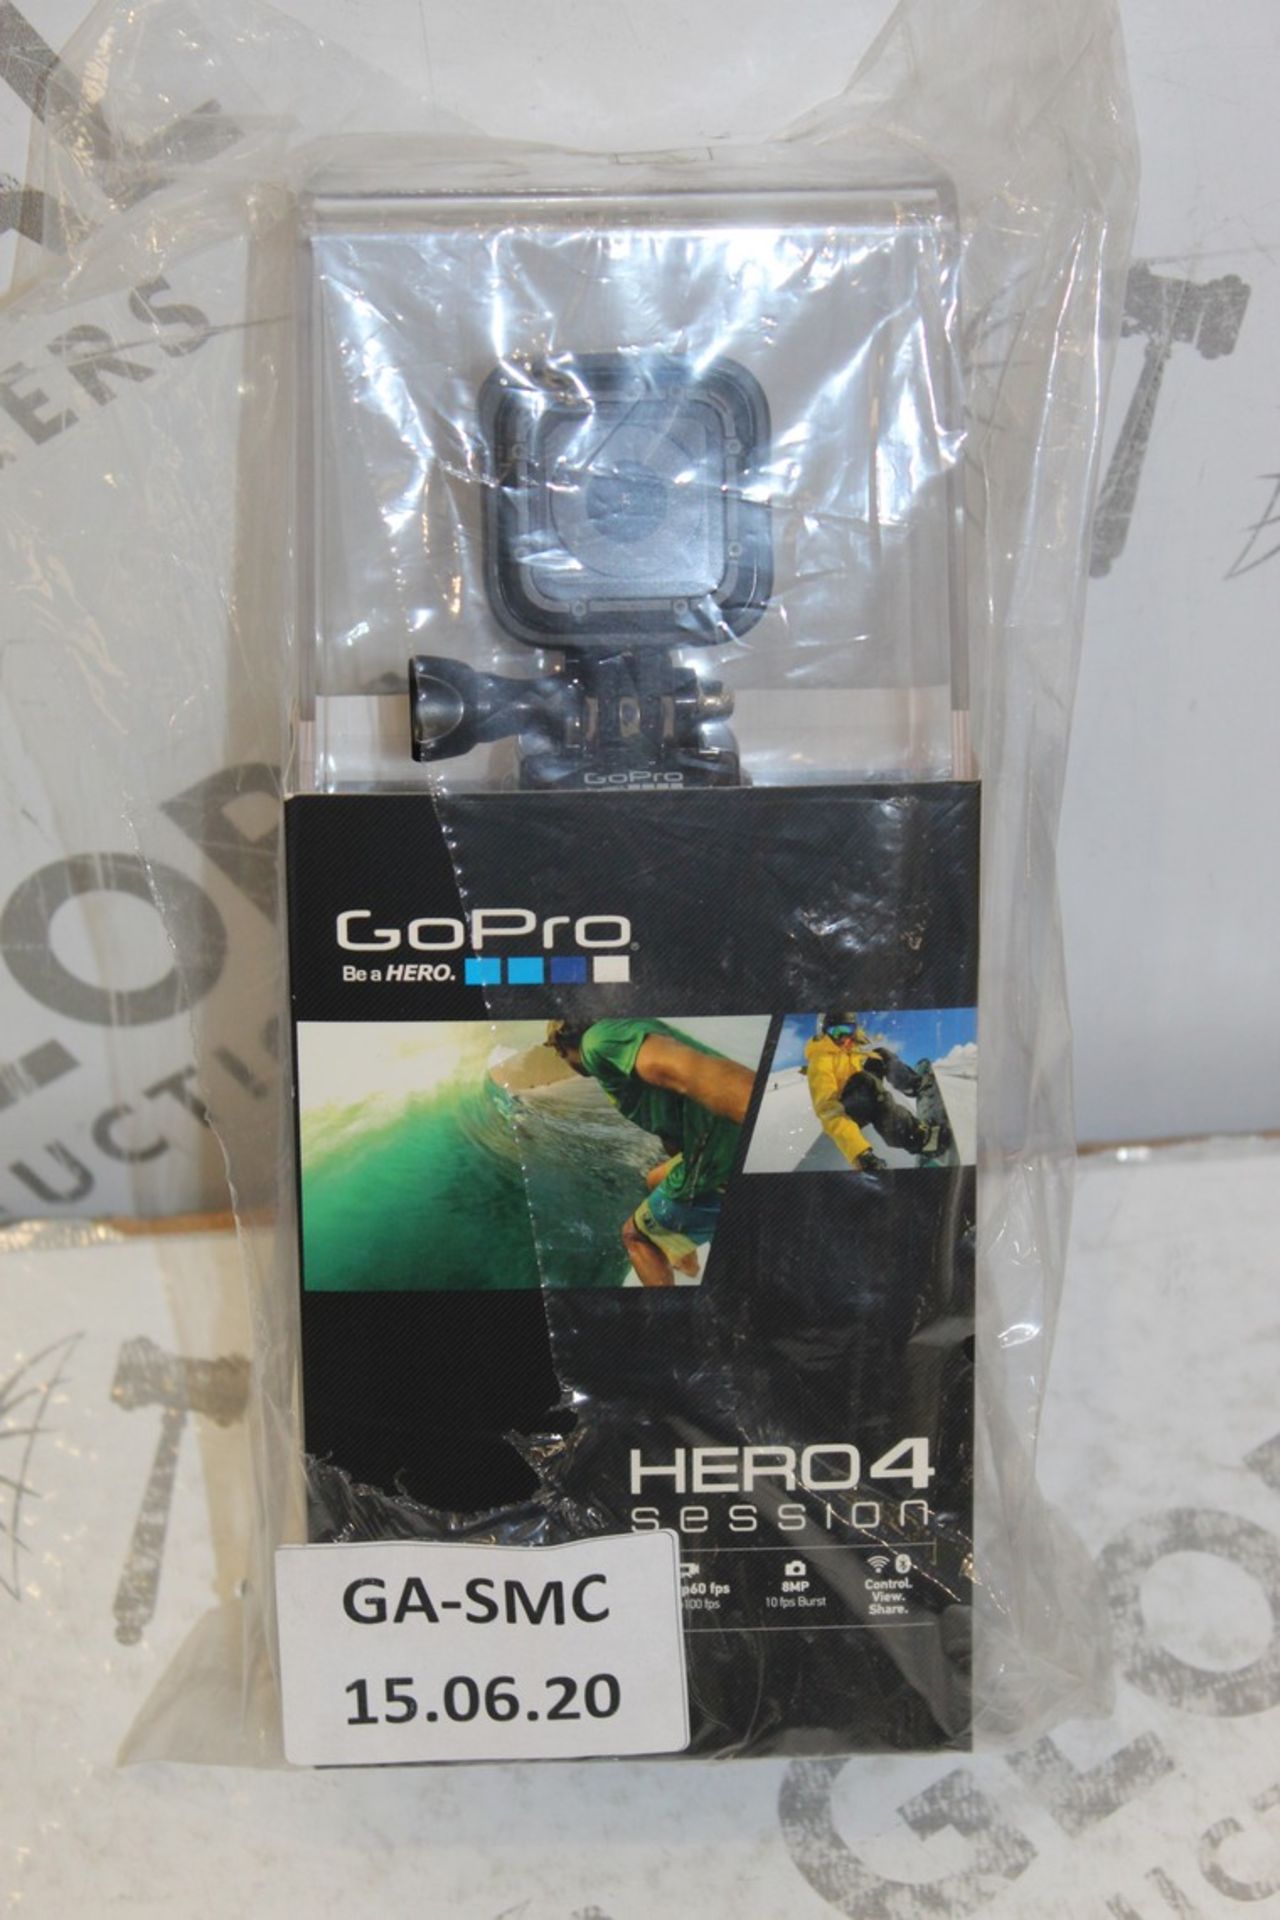 Boxed Gopro Hero 4 Session Action Camera RRP £300 (Pictures Are For Illustration Purposes Only) (